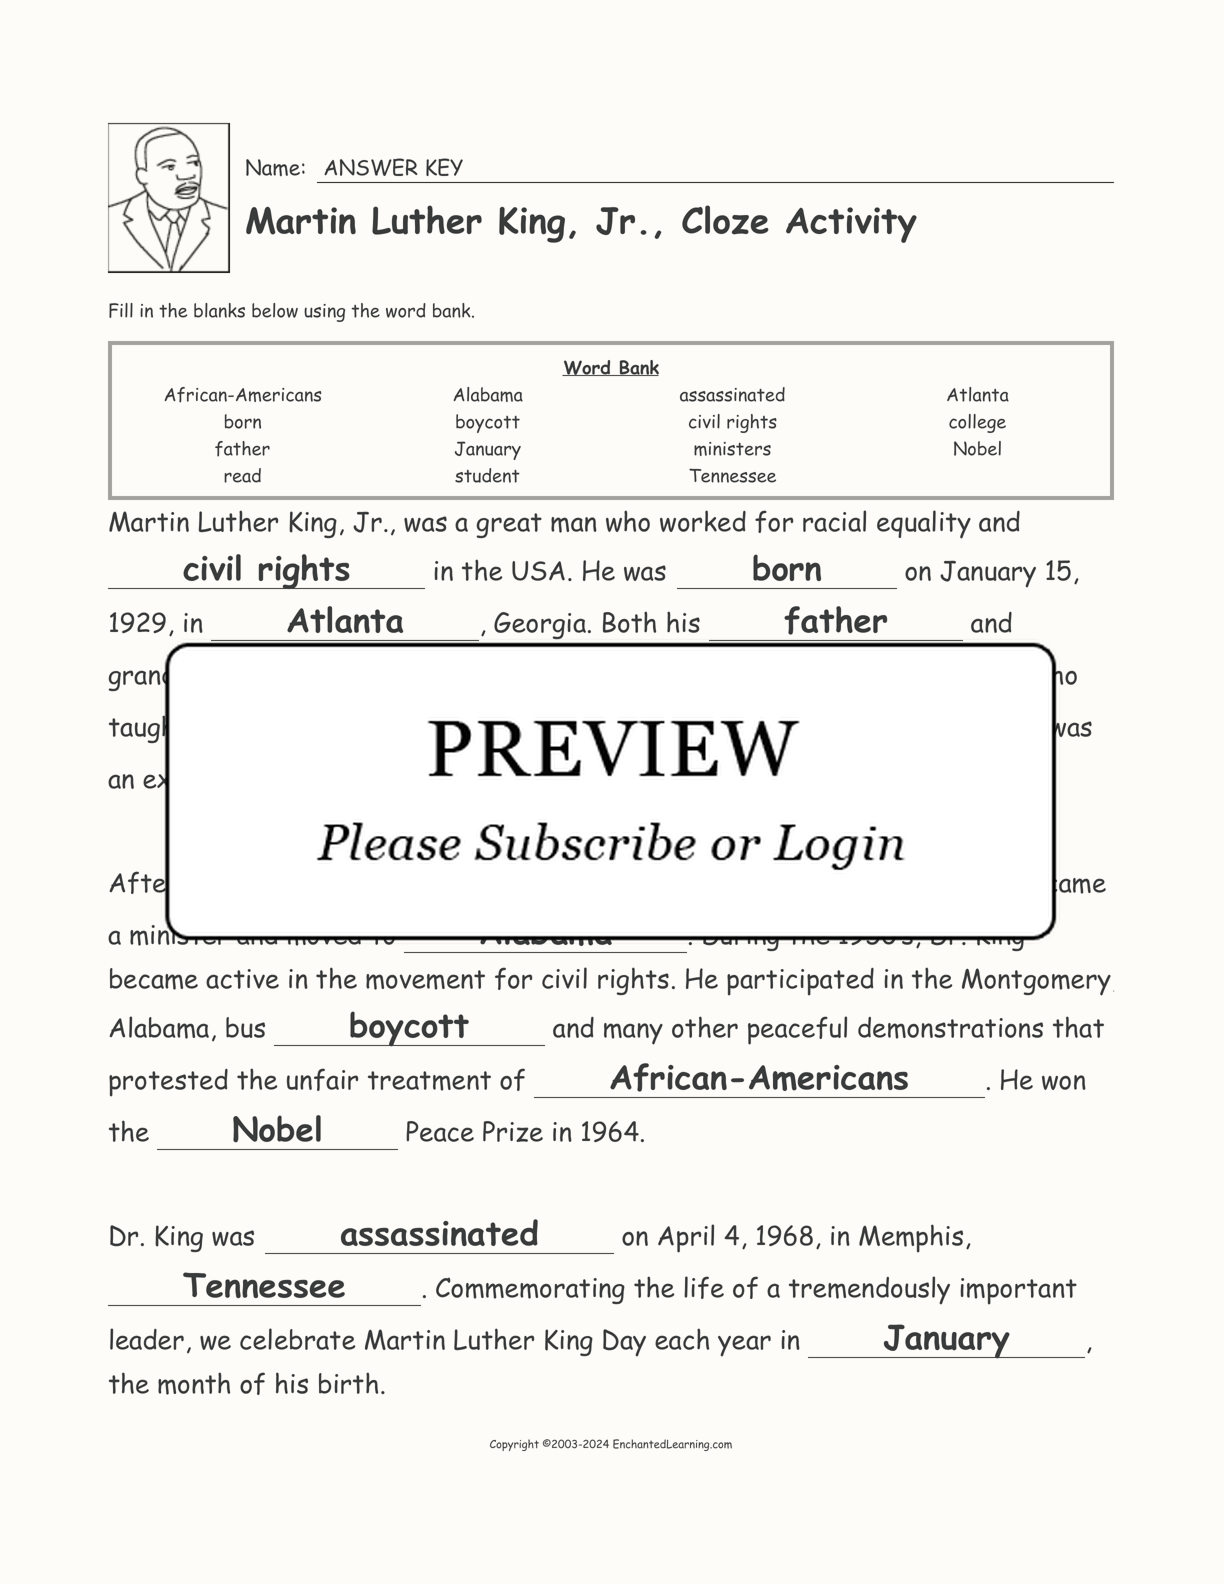 Martin Luther King, Jr., Cloze Activity interactive worksheet page 2